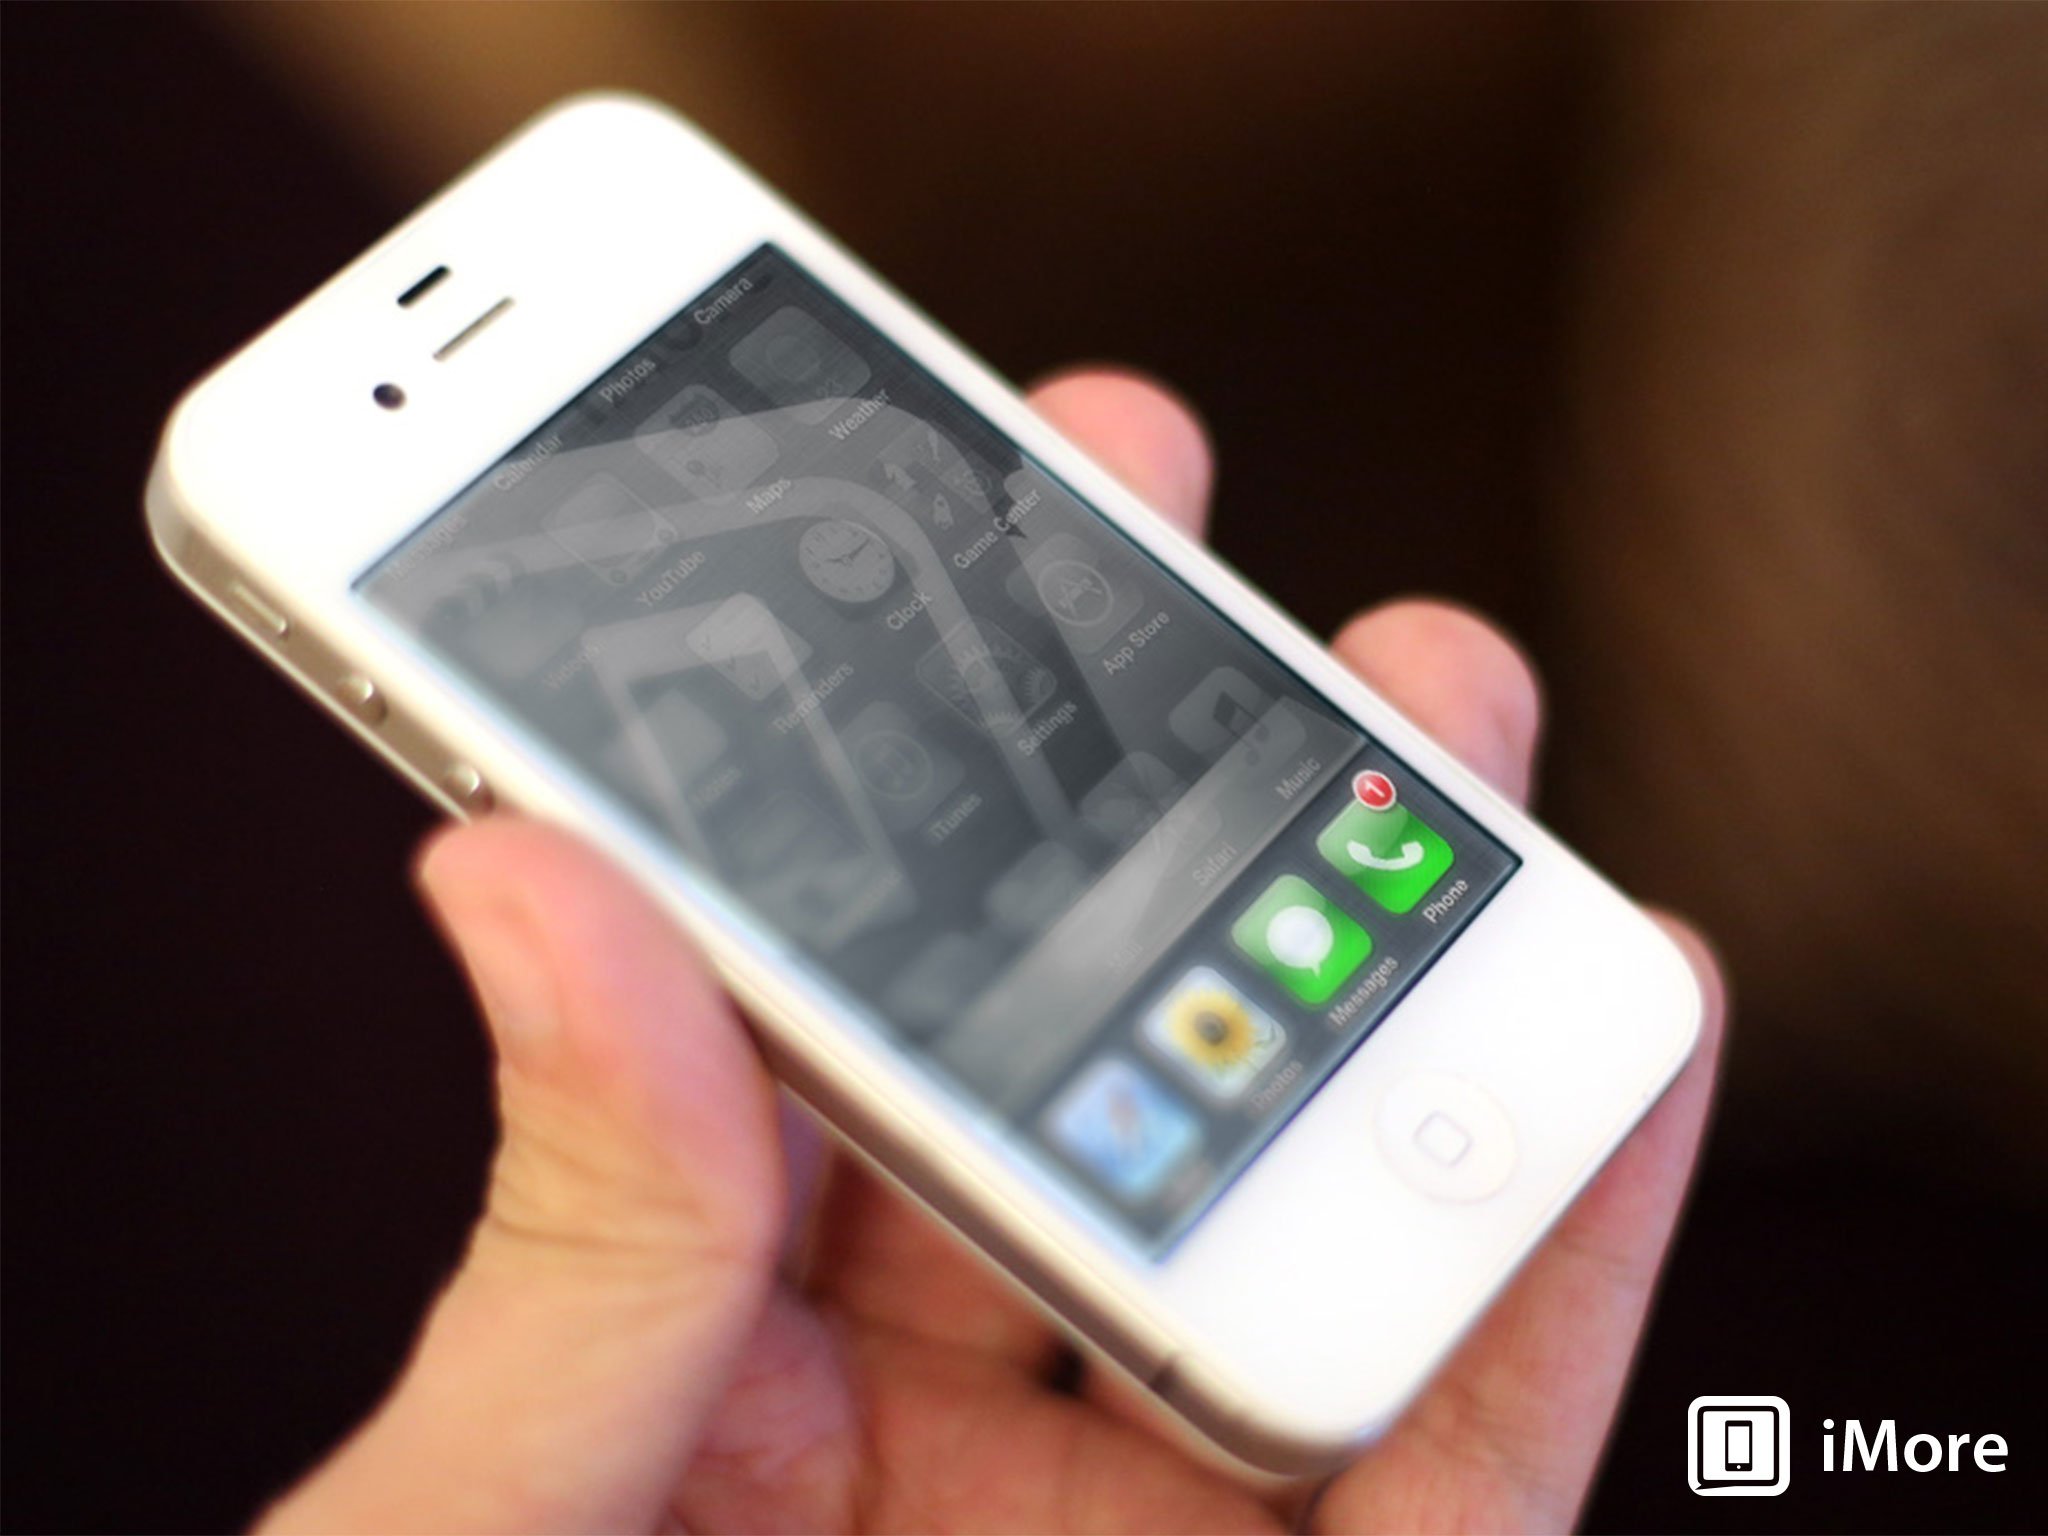 Complete review of Apple's iOS 4 software for iPhone and iPod touch